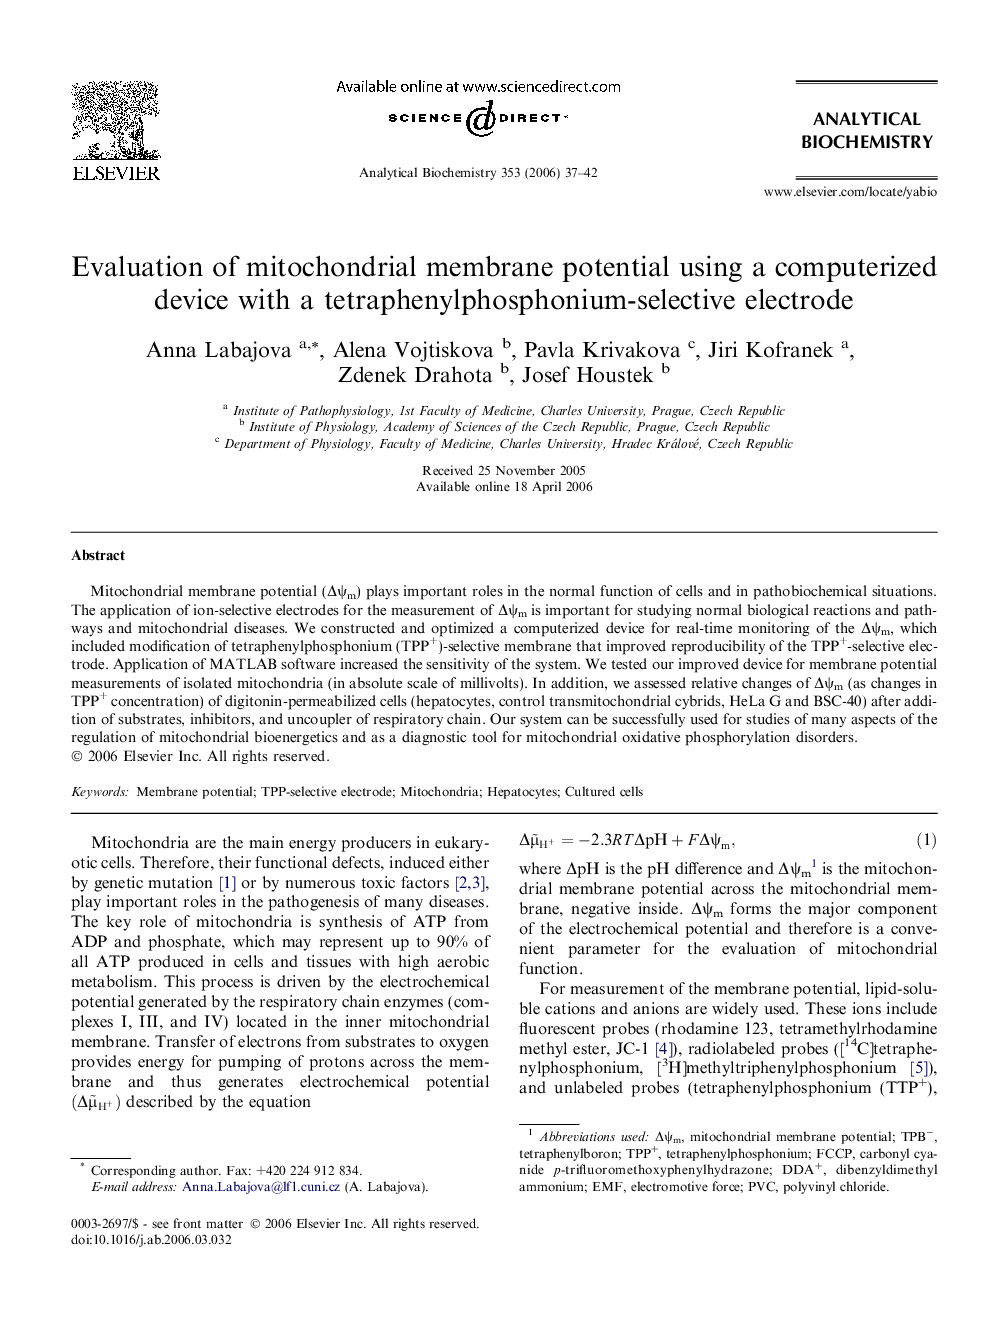 Evaluation of mitochondrial membrane potential using a computerized device with a tetraphenylphosphonium-selective electrode